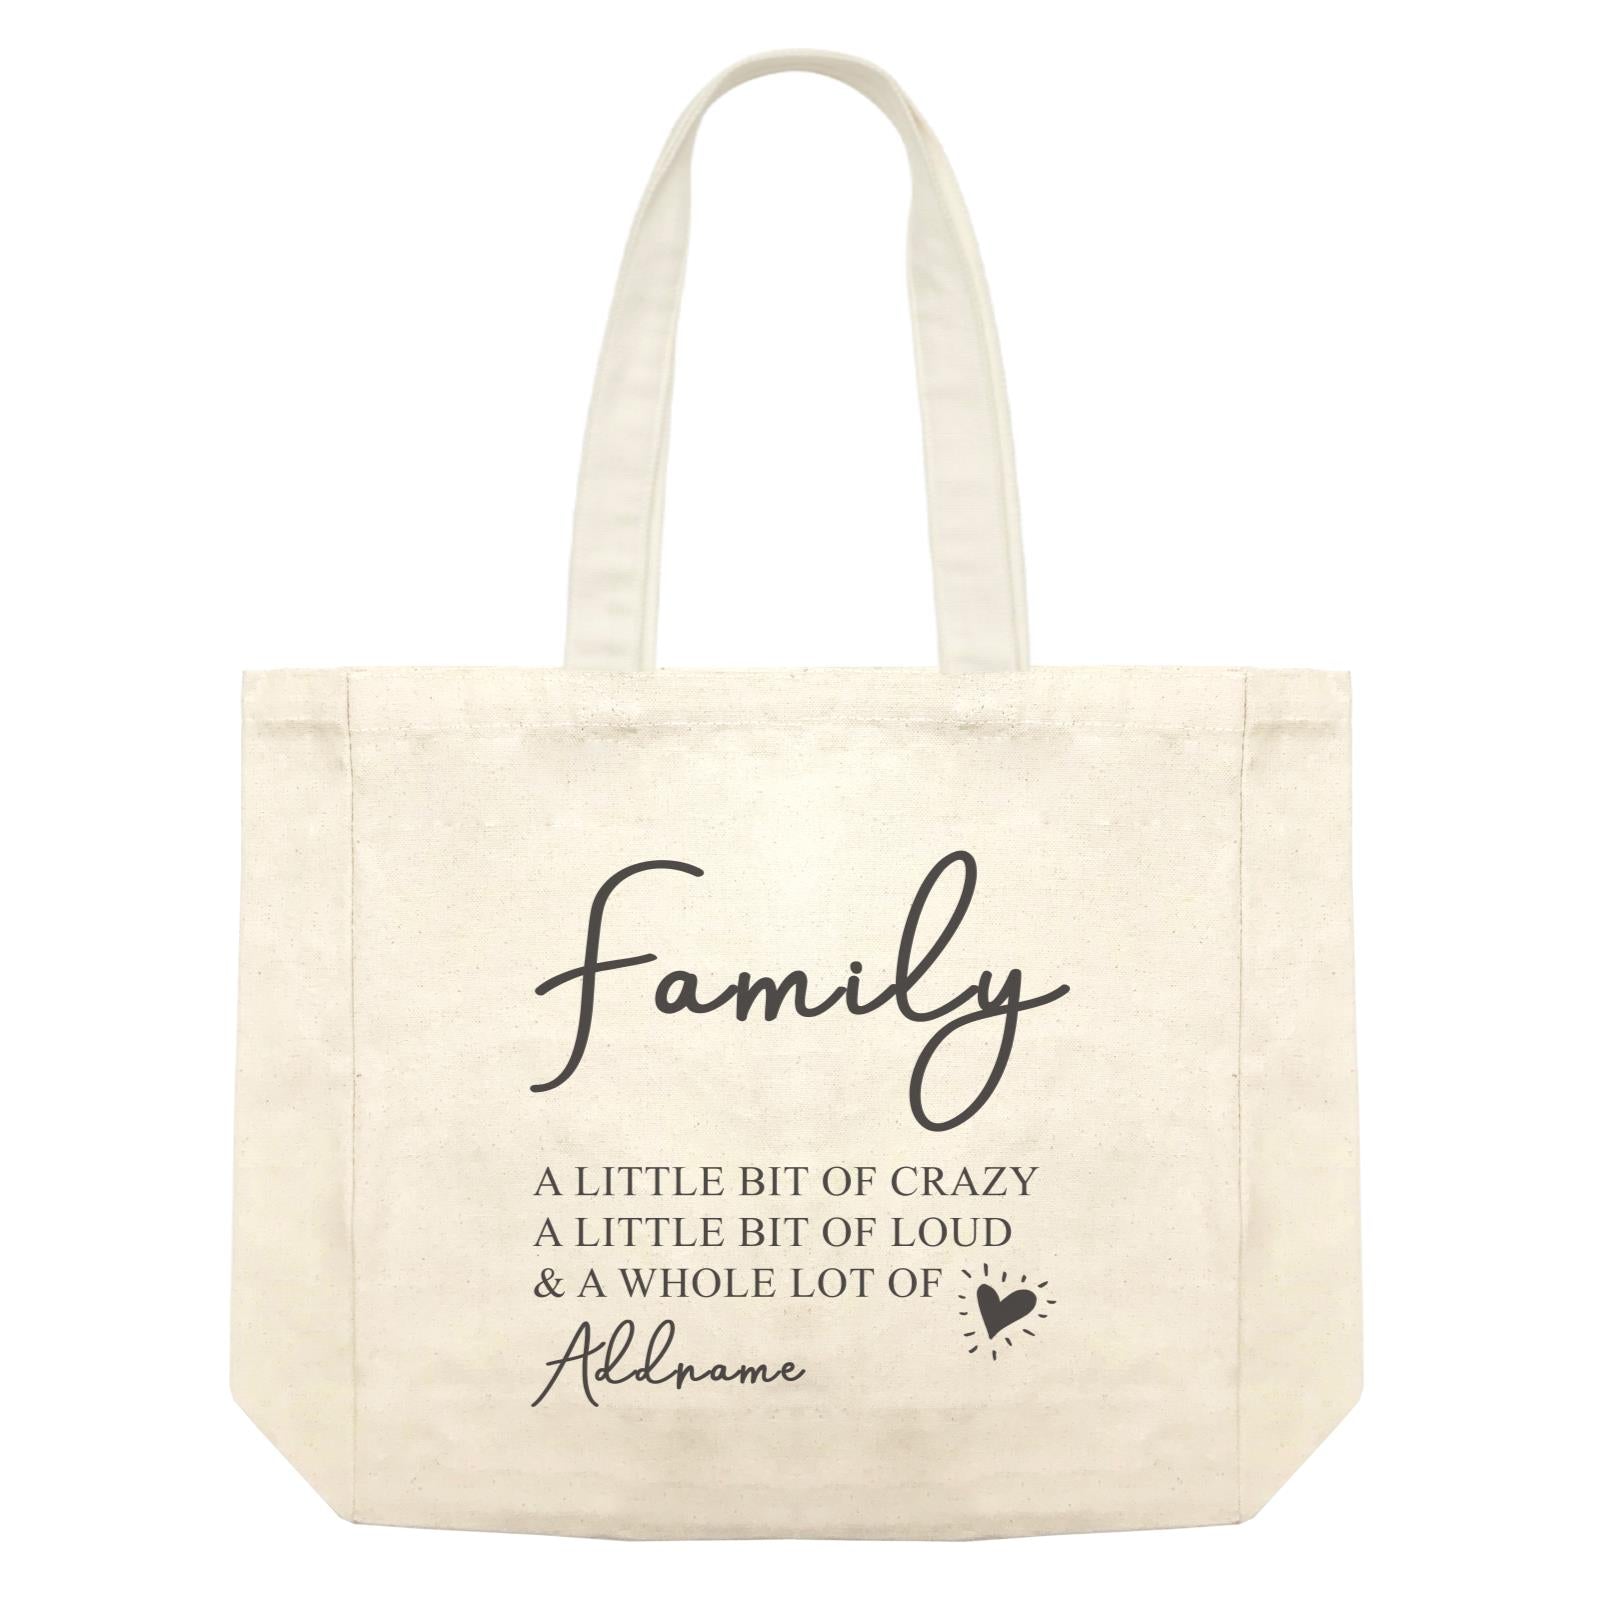 Family Is Everythings Quotes Family A Whole Lot Of Love Icon Addname Shopping Bag